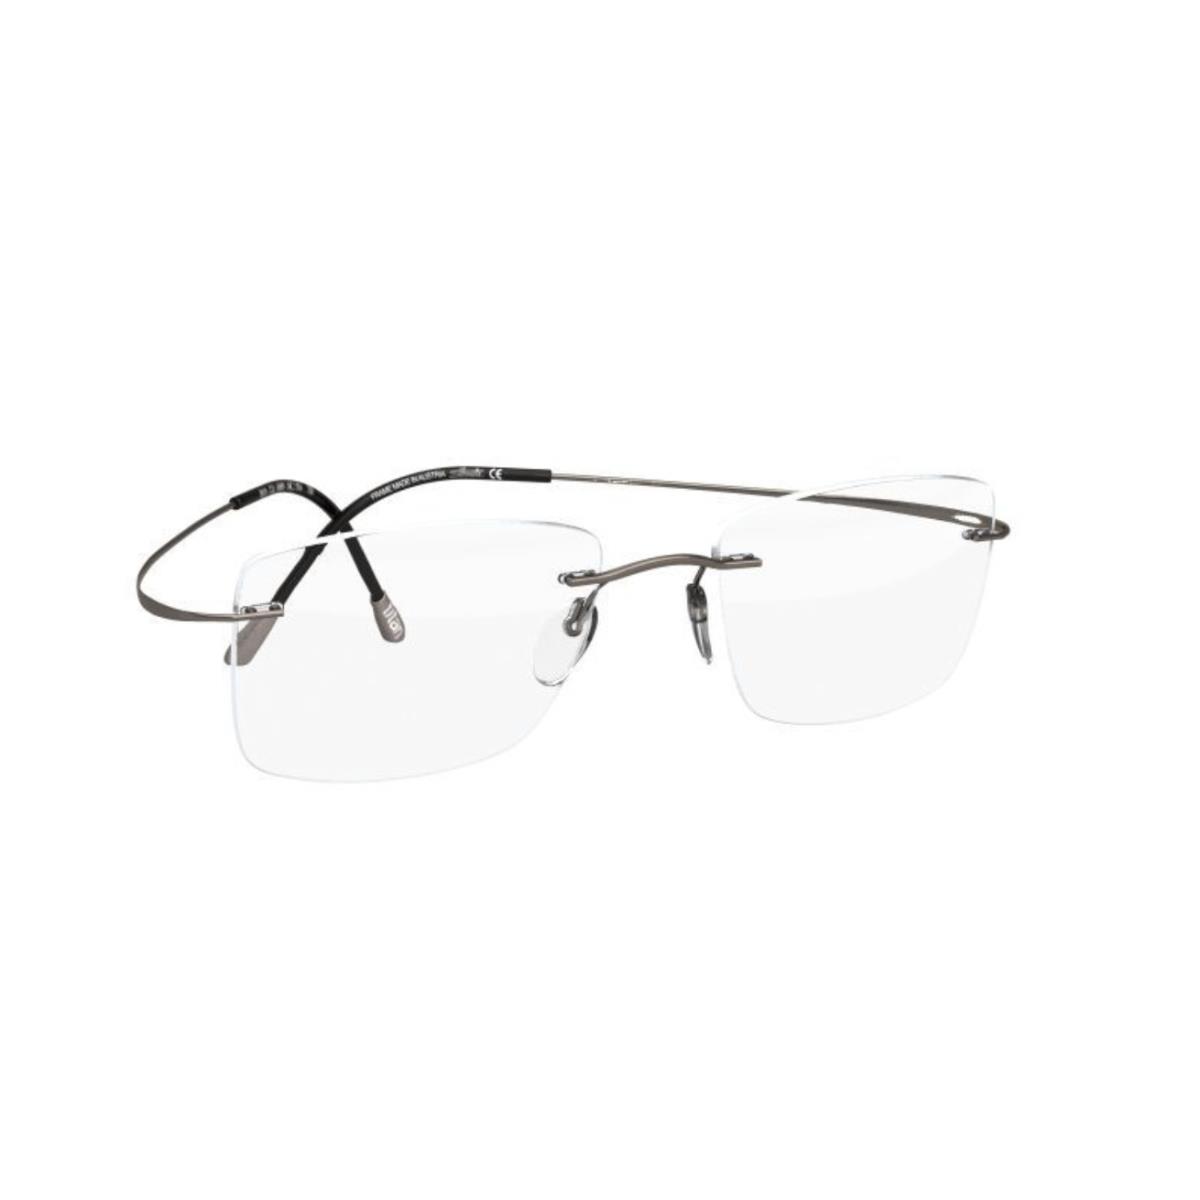 Silhouette 5515 Rimless Eyeglasses Titan Minimal Art The Must Collection Frames FOSSIL - 6560, SIZE: 54-19 150, SHAPE - CQ